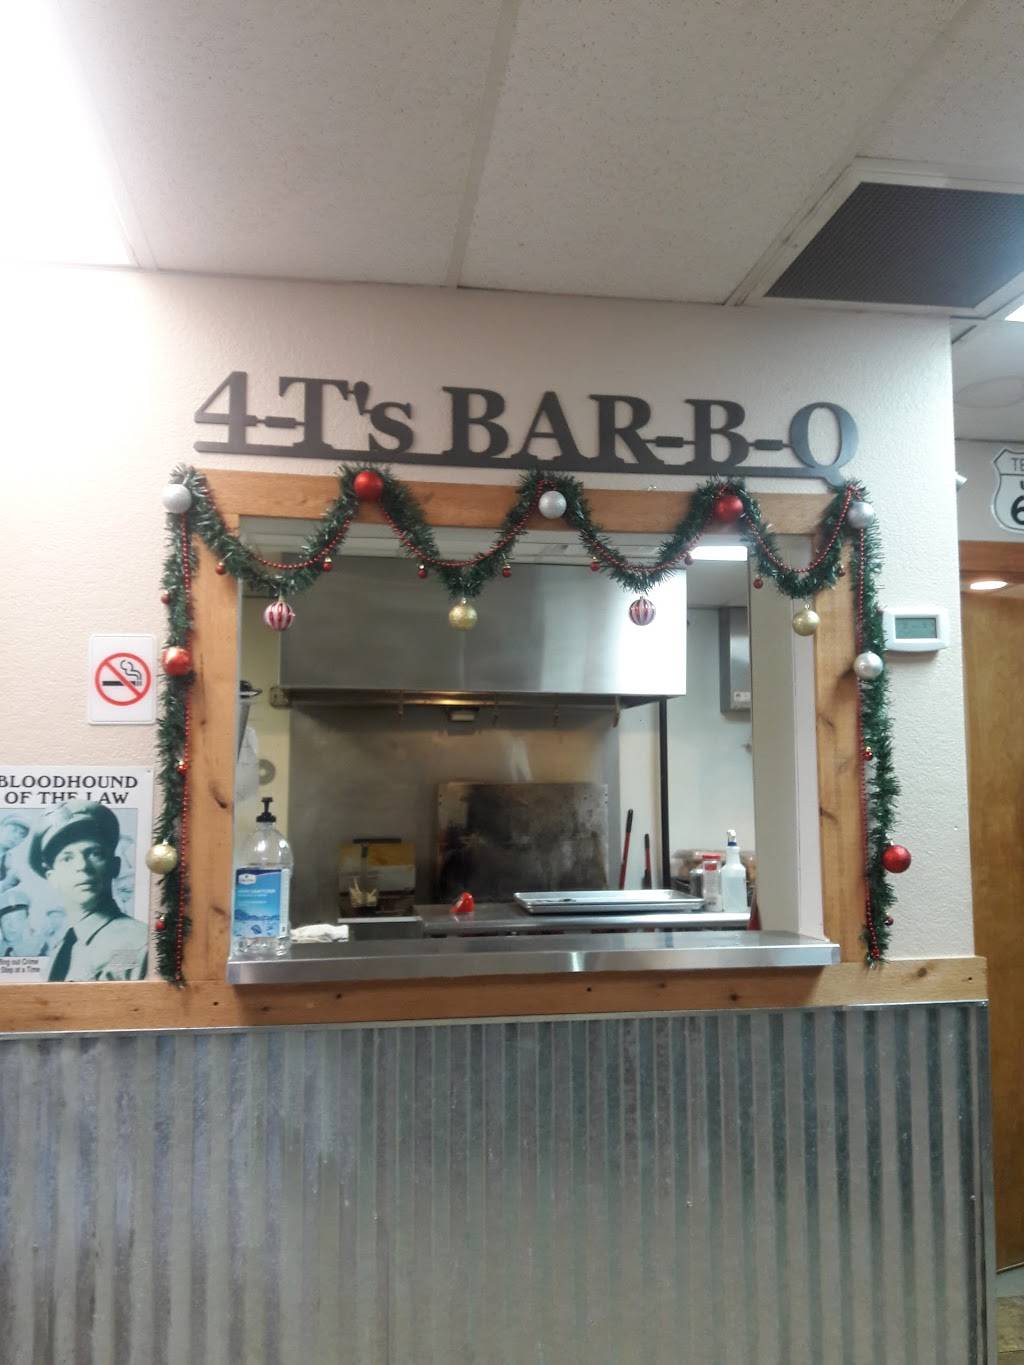 4-TS Bar-B-Q & Catering | 205 W Broad St, Forney, TX 75126 | Phone: (972) 552-3363